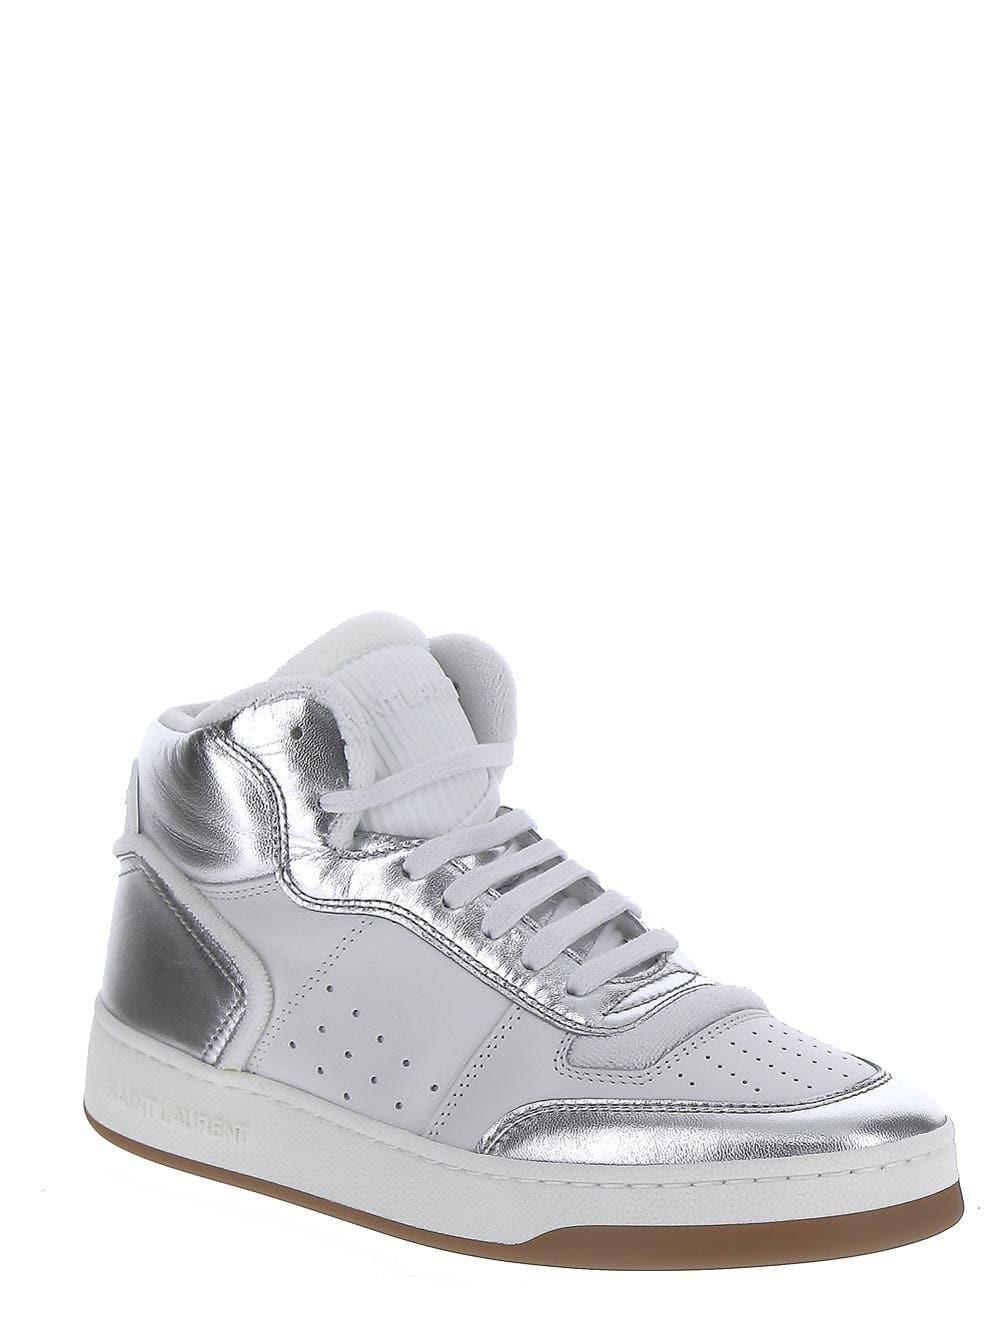 Saint Laurent Sl/80 Mid-top Sneakers In Smooth And Grained Leather 